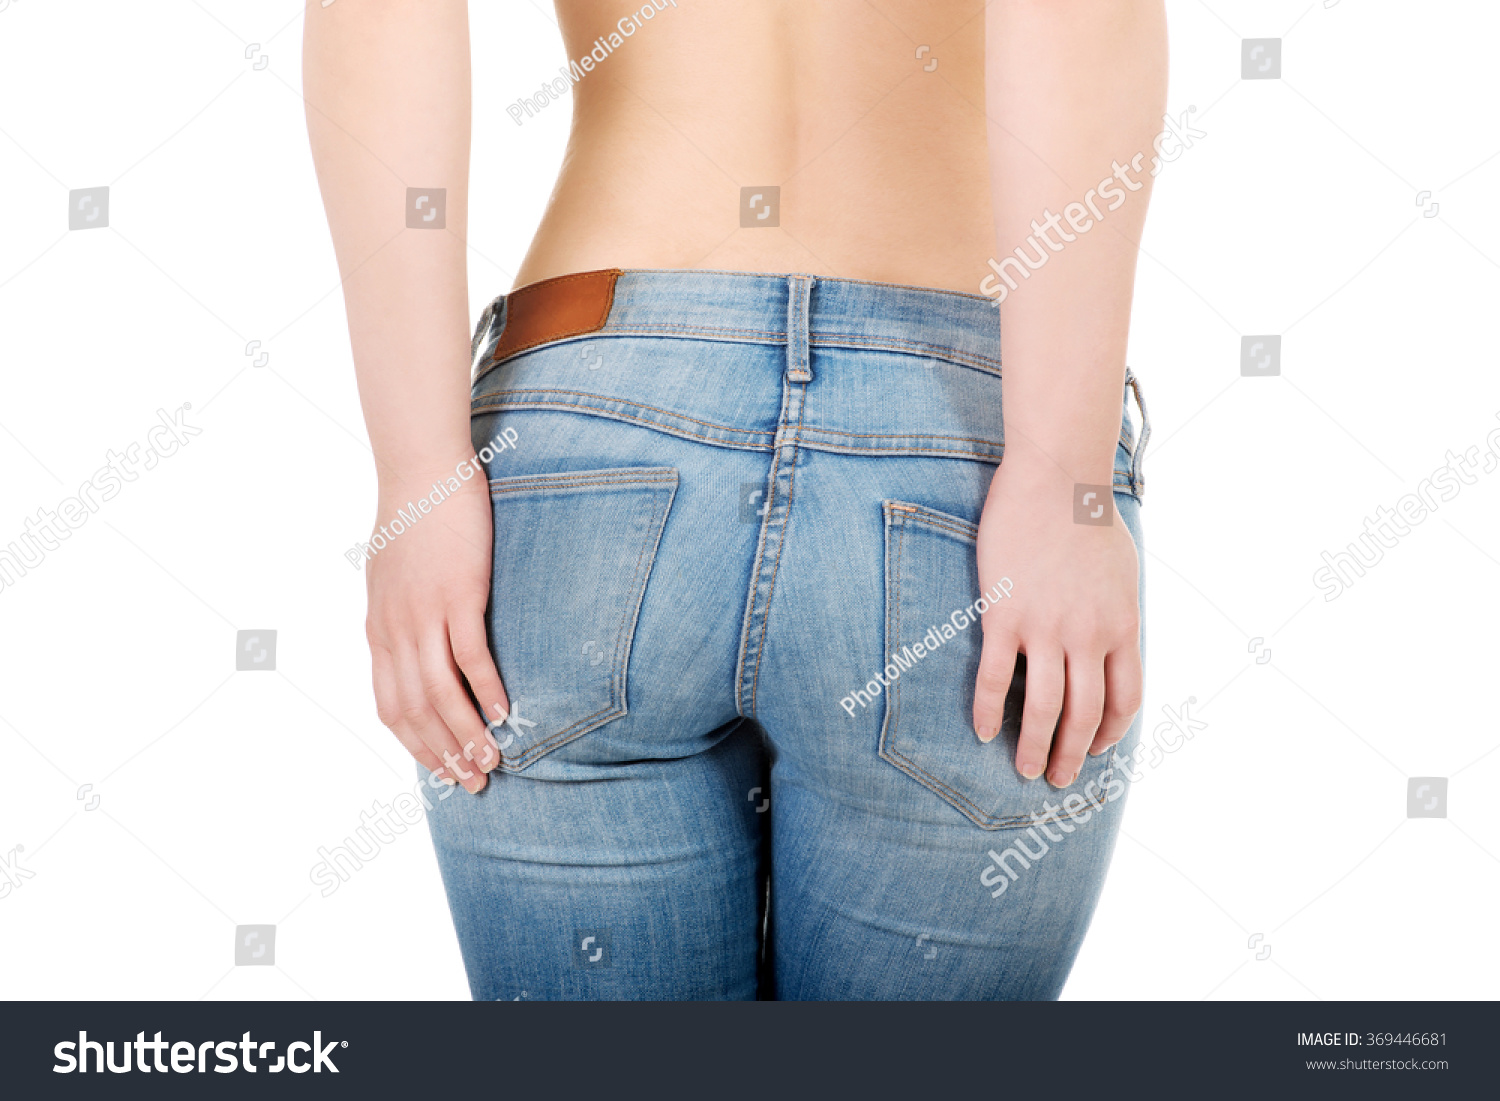 Shirtless Woman Alluring Jeans Stock Photo Shutterstock